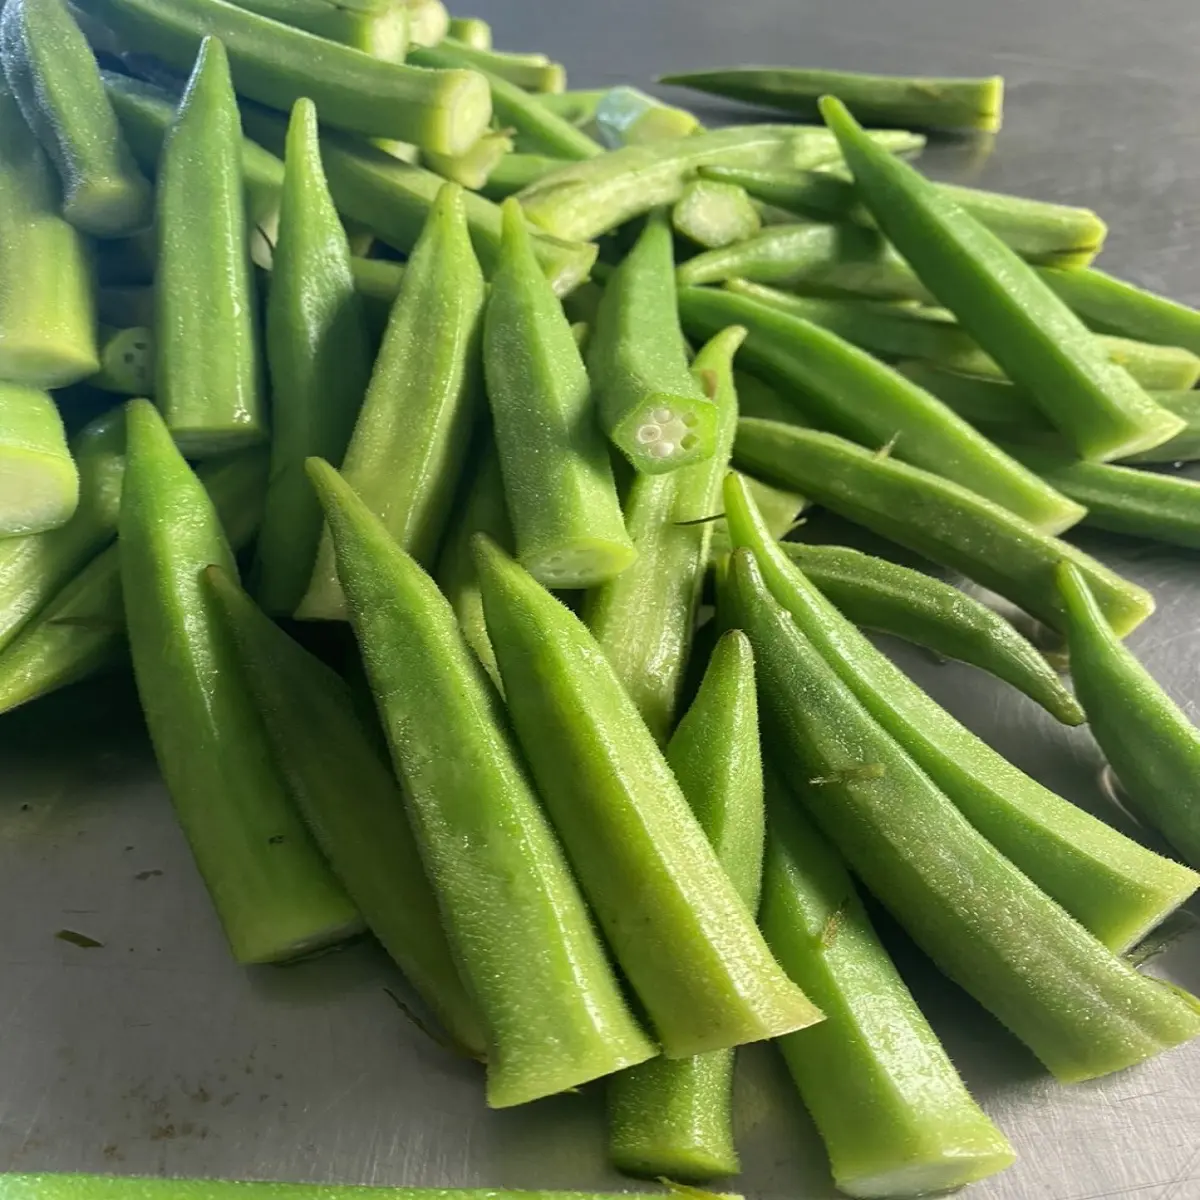 Competitive Price Frozen Okra With High Quality From Vietnam Supplier- Whatsapp 0084 989 322 607